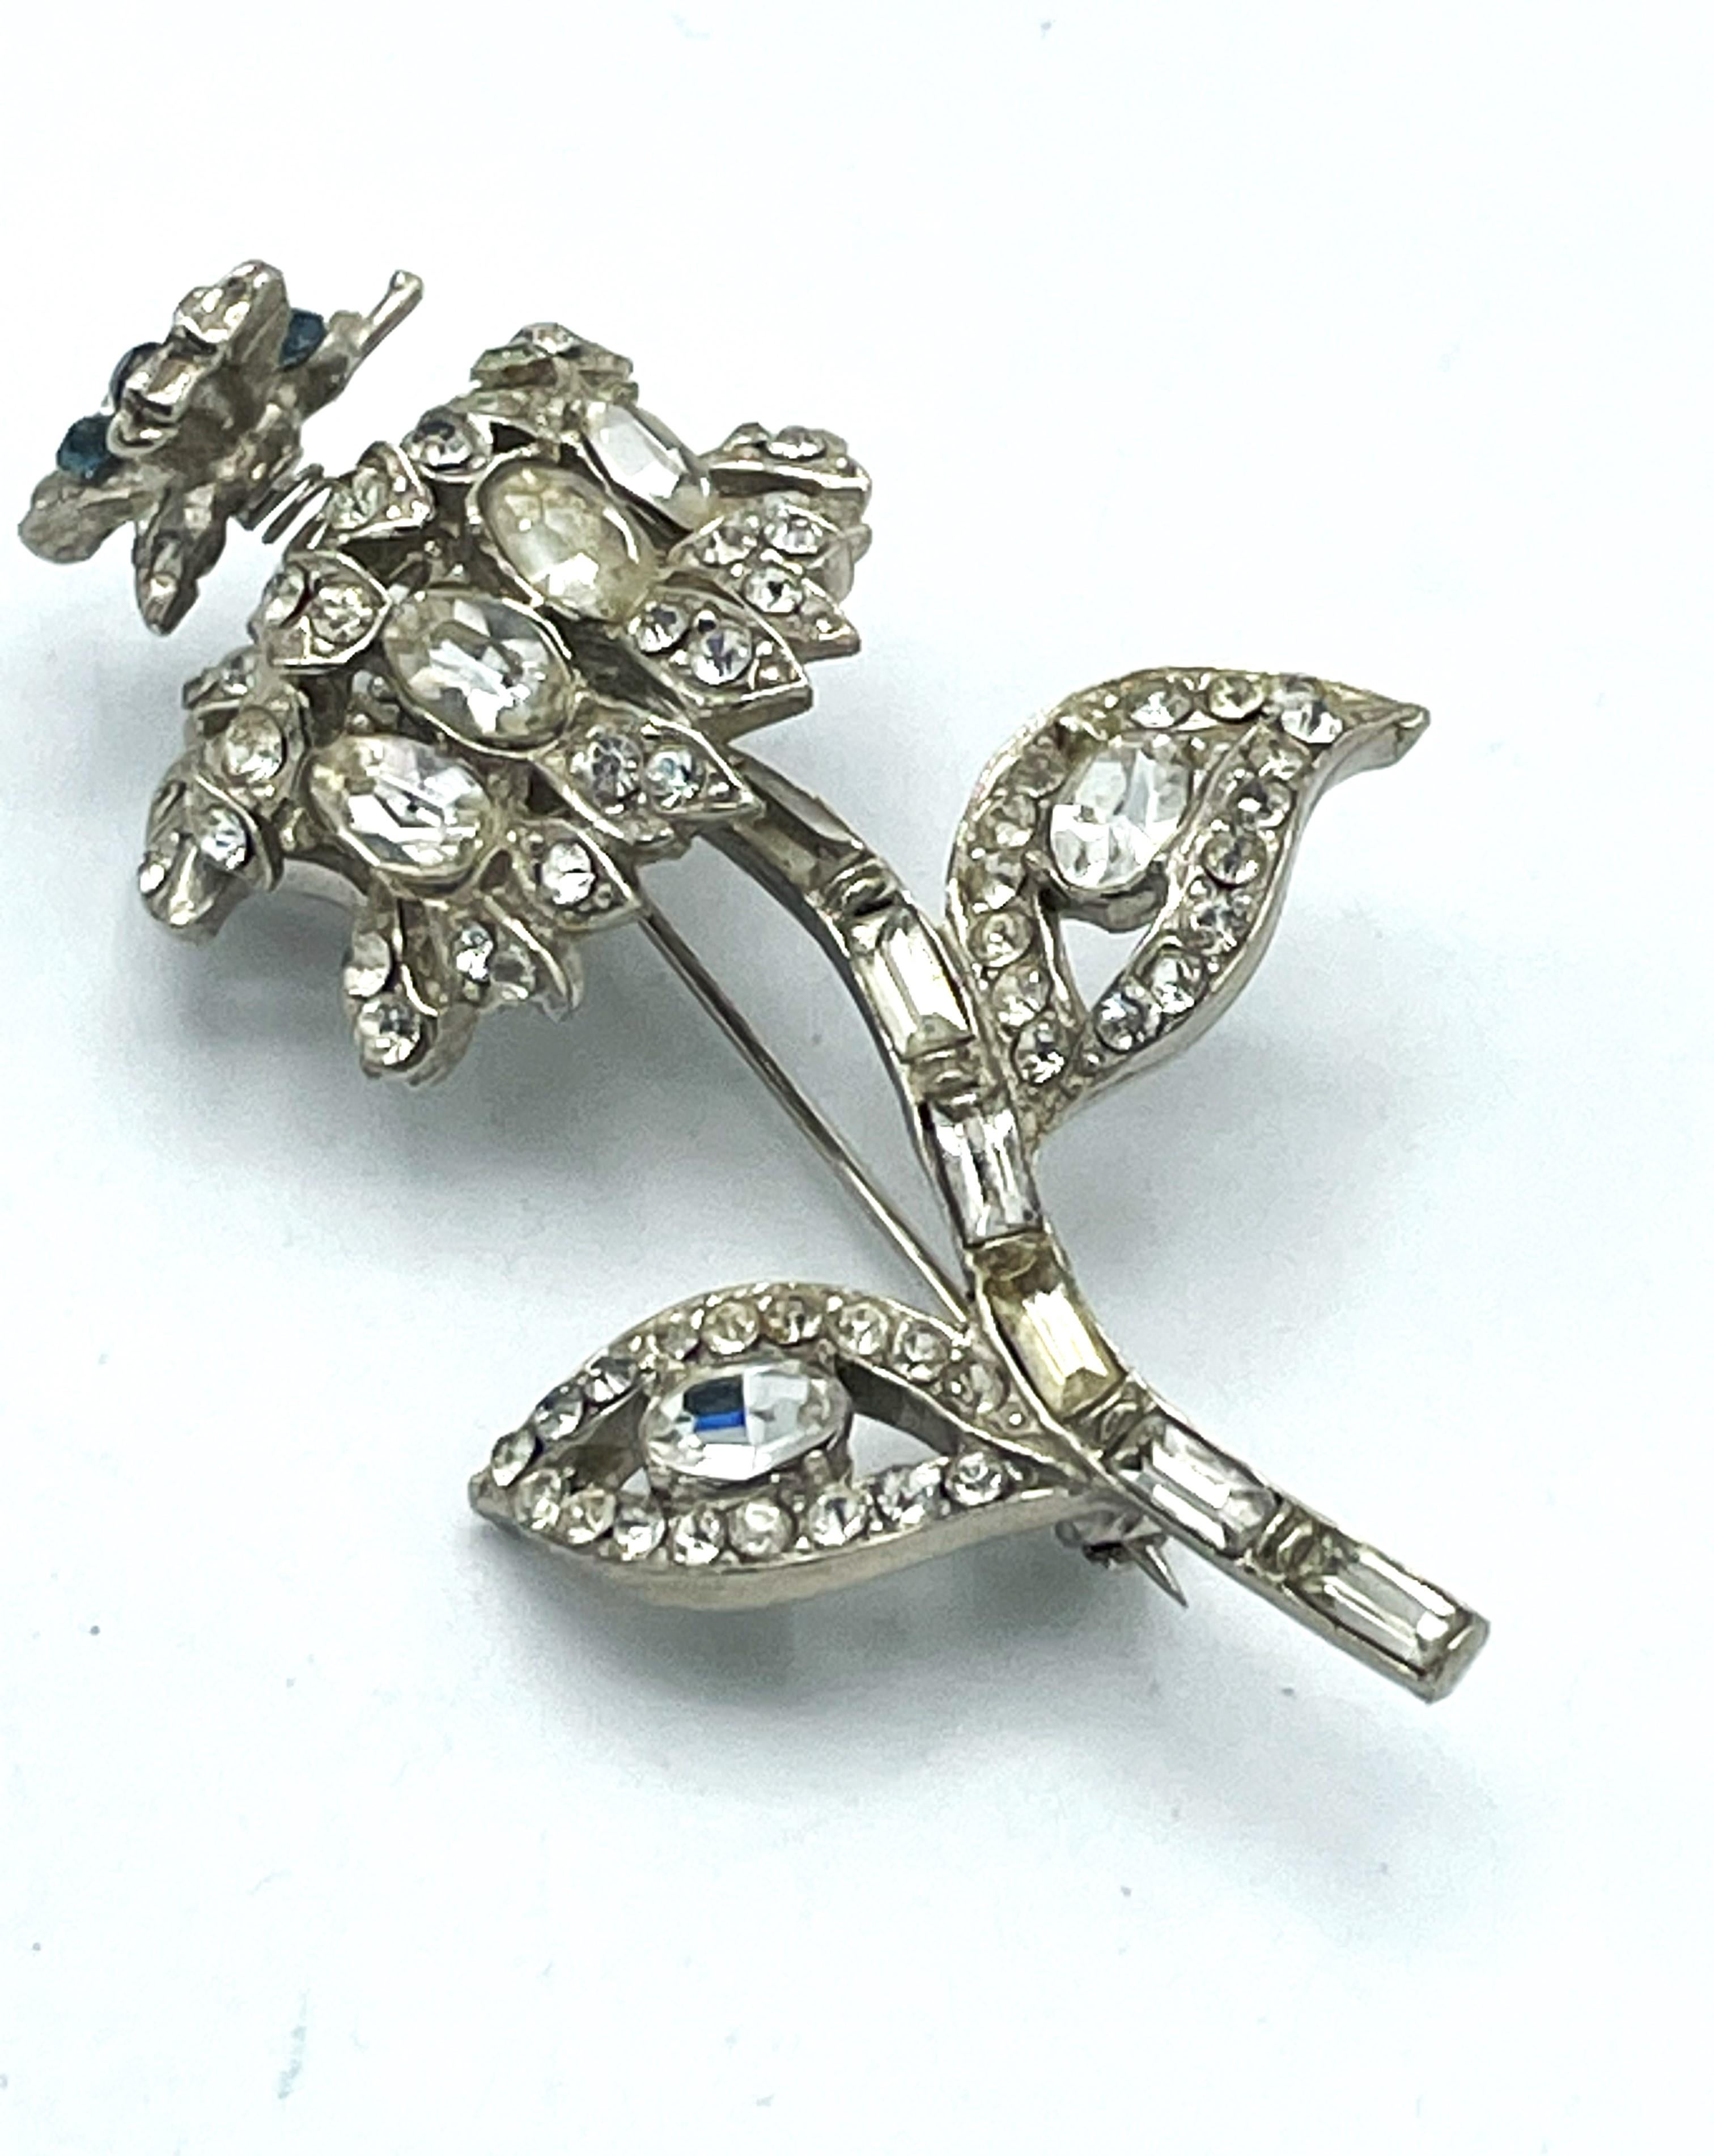 Flower brooch with a small moving butterfly on top, fully set with rhinestones, rhodium-plated metal 1940 US

Dimensions
Hight    6 cm 
Width   3.5 cm 
moving  butterfly  1 cm x 1.3 cm 